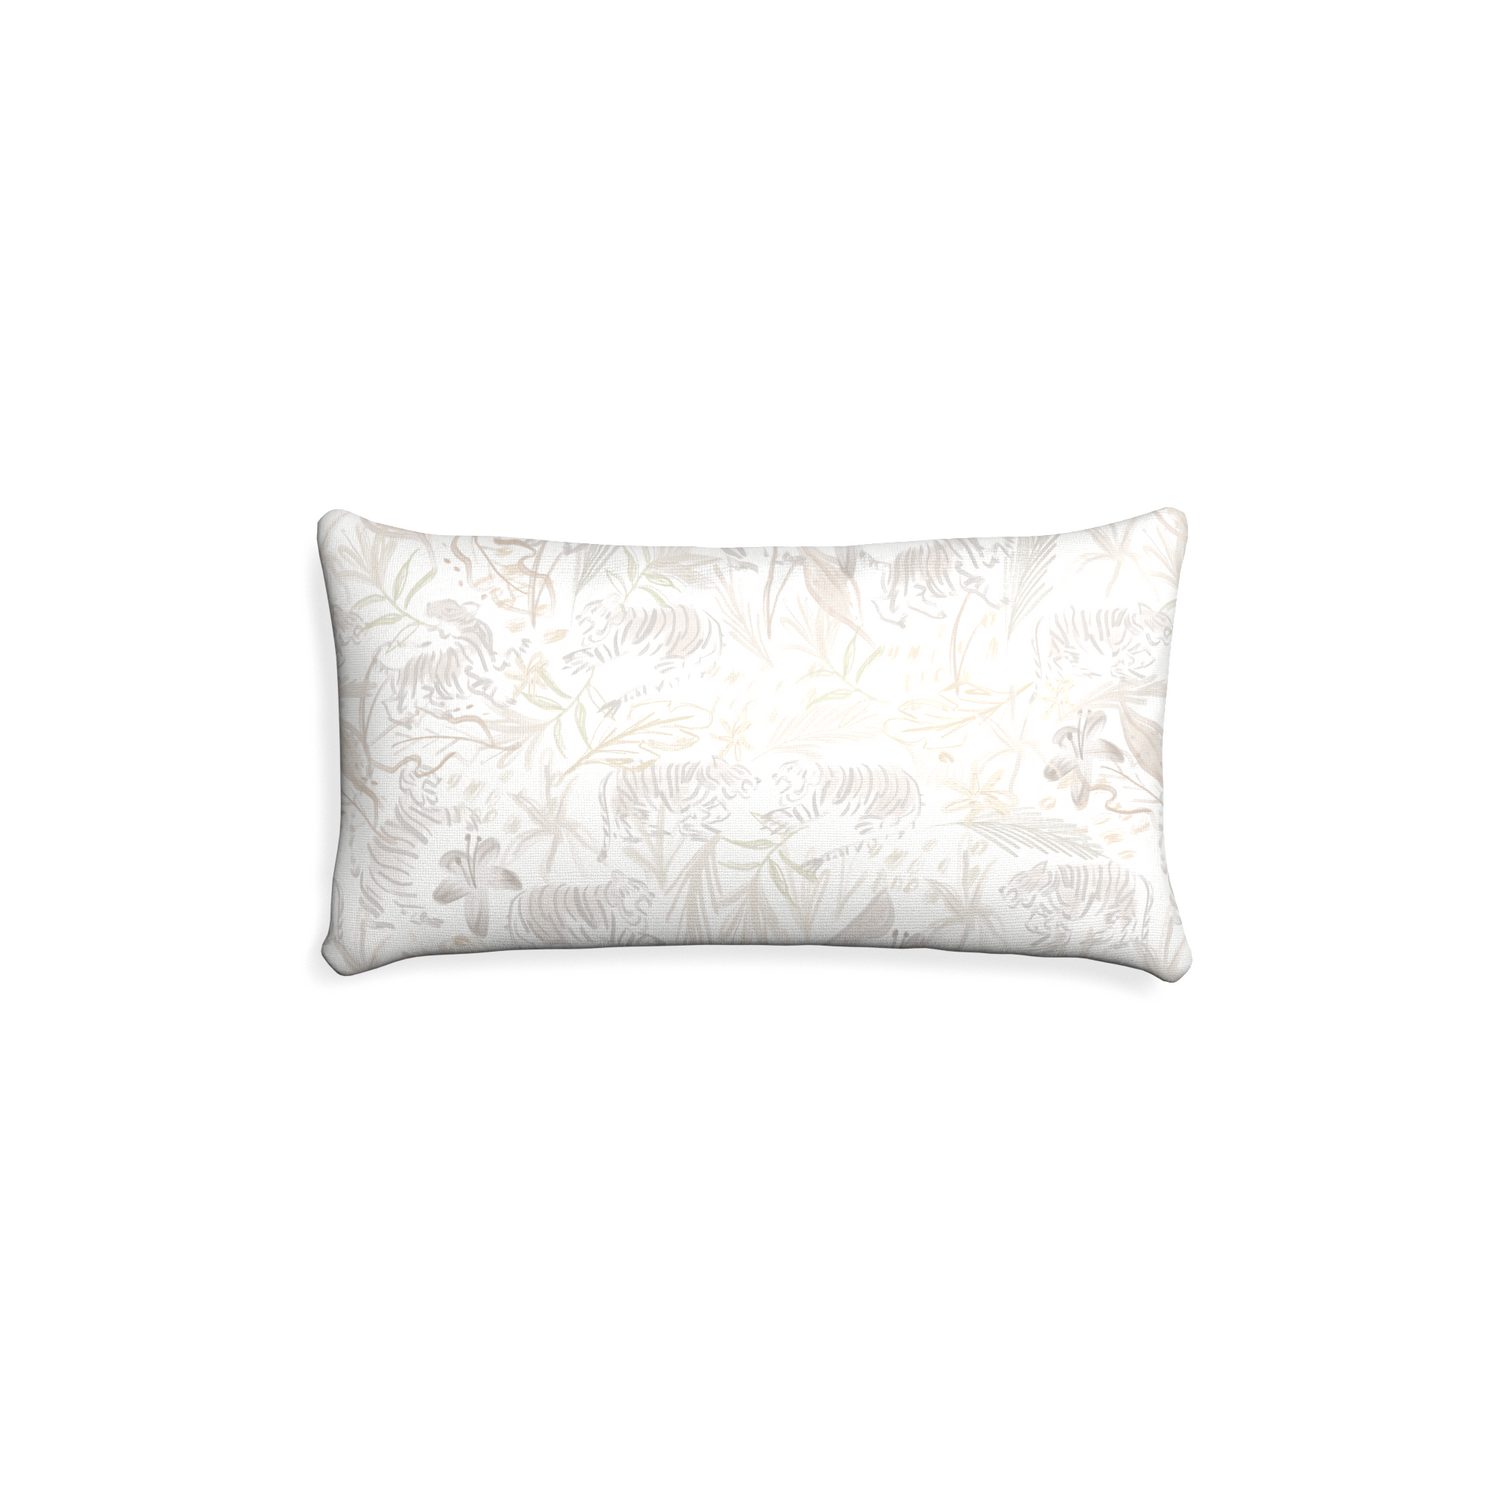 Petite-lumbar frida sand custom beige chinoiserie tigerpillow with none on white background